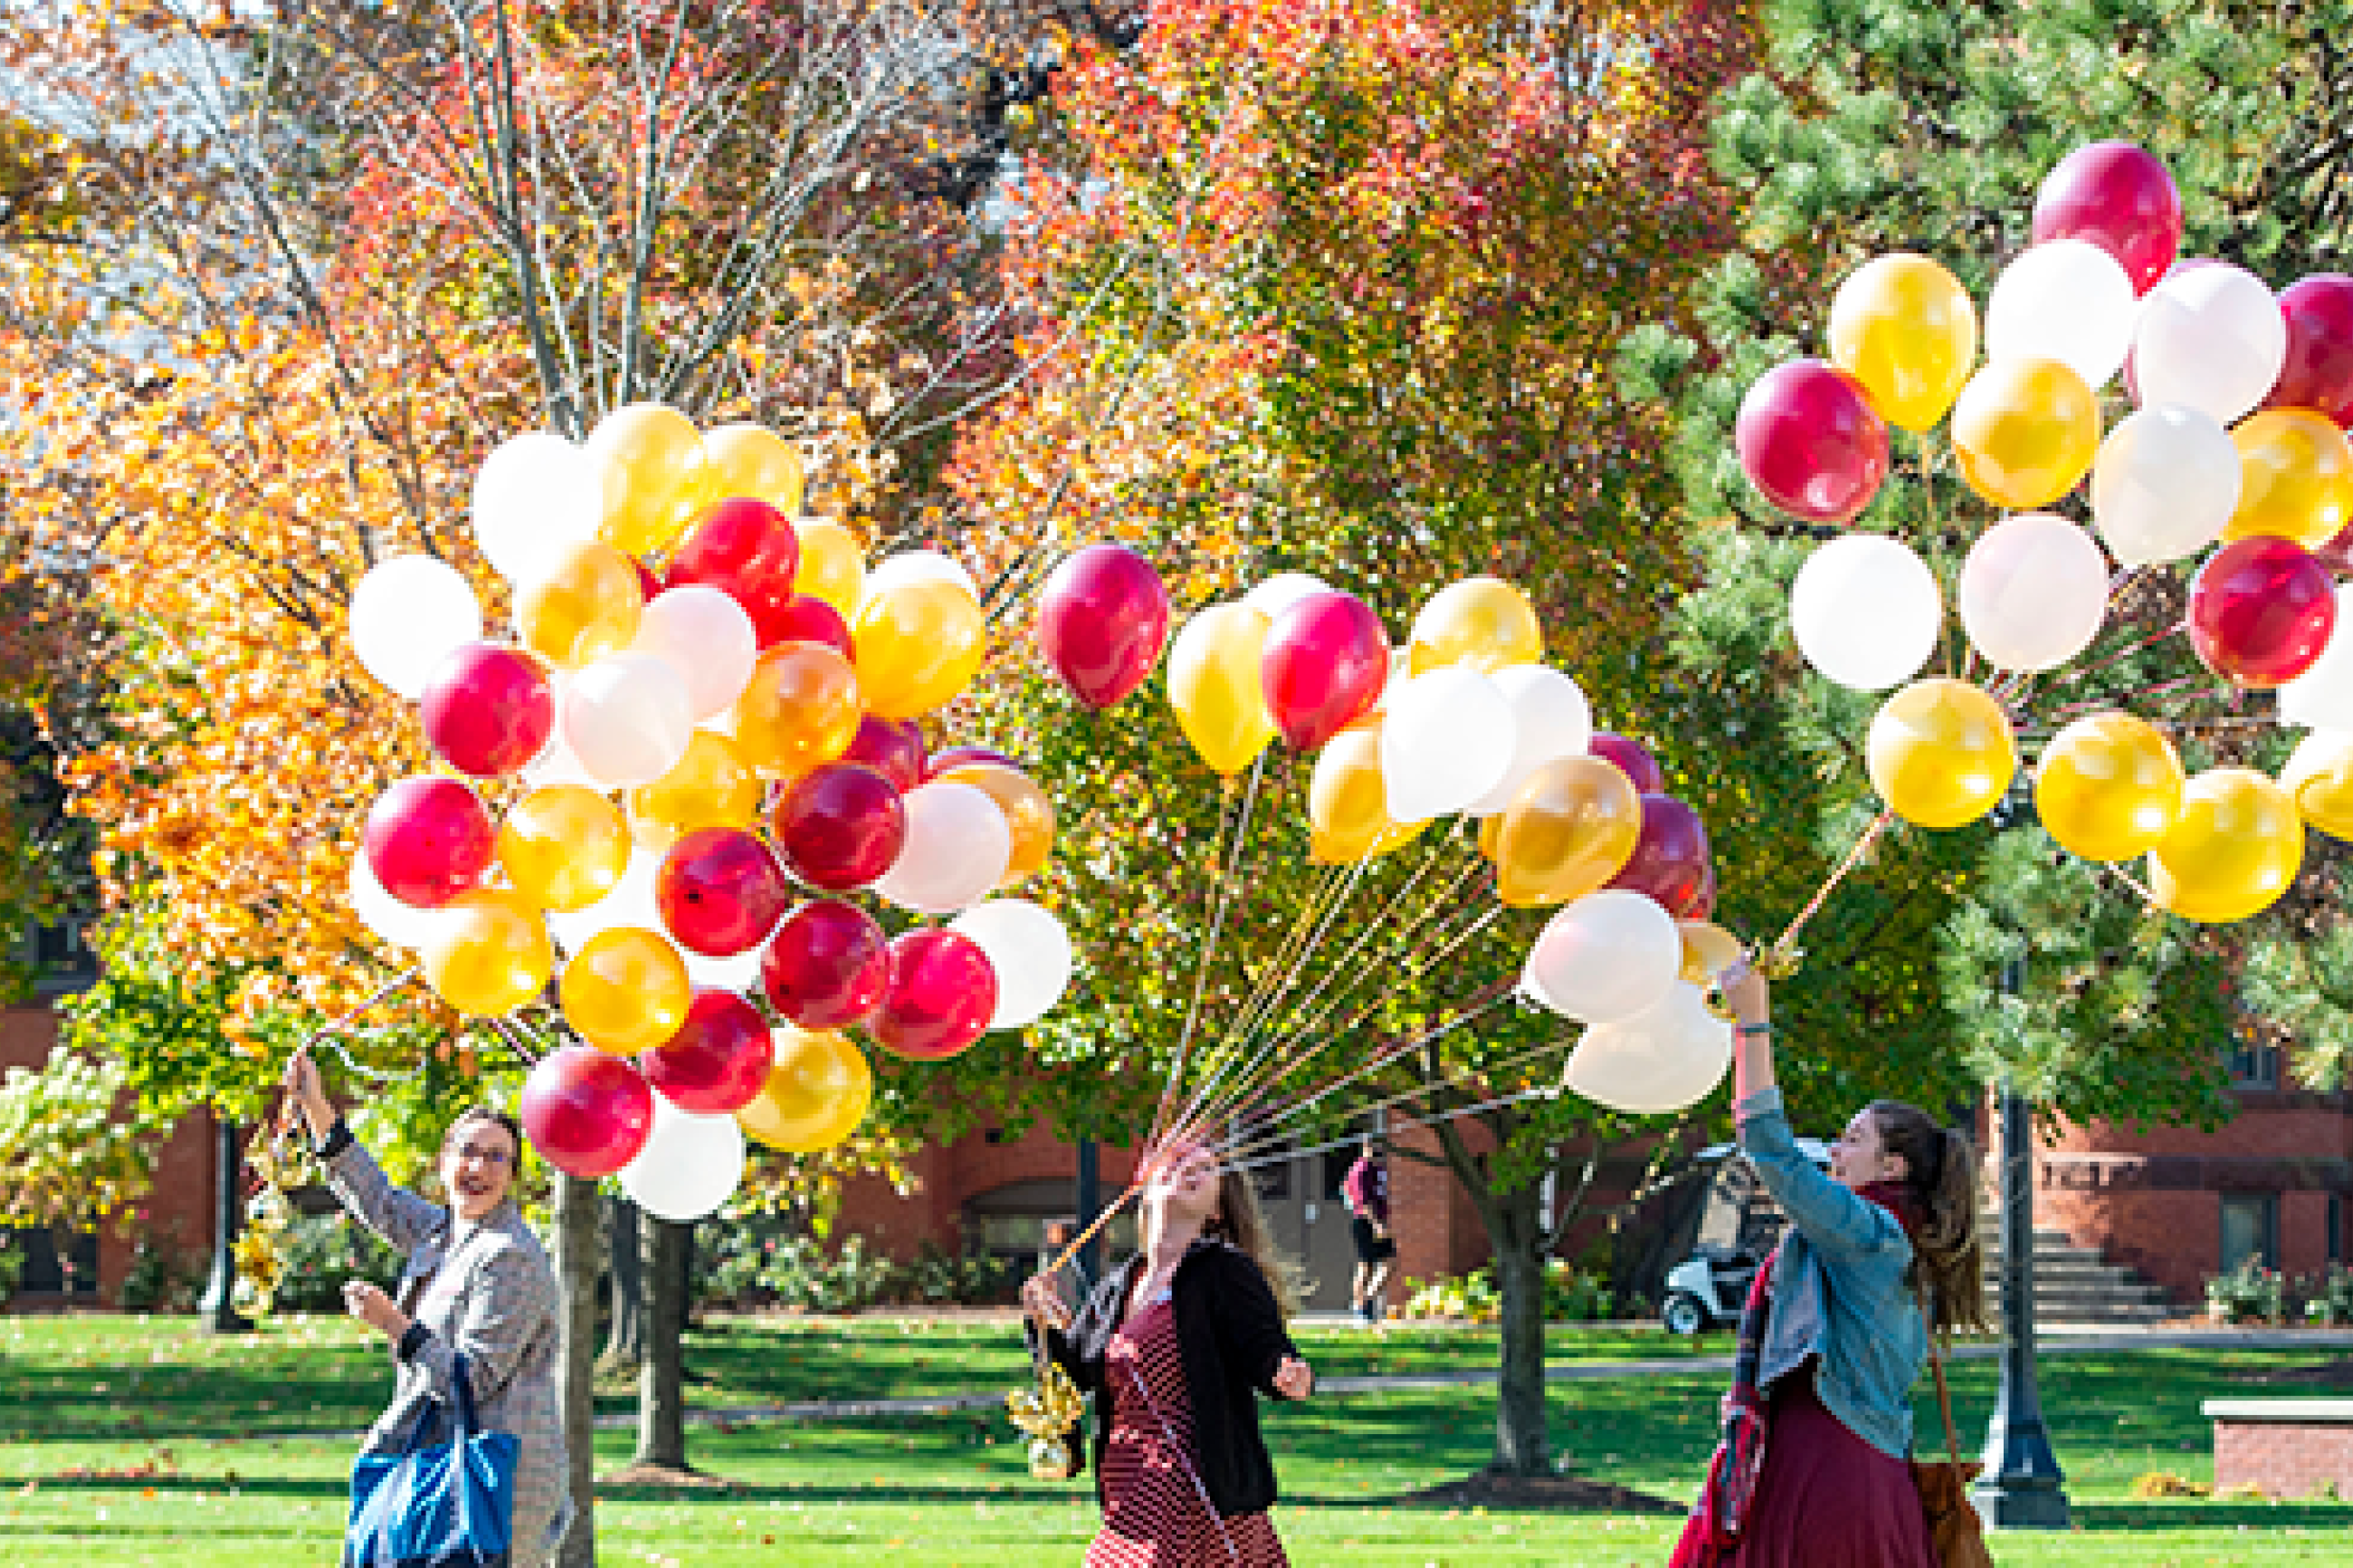 walking with balloons on campus